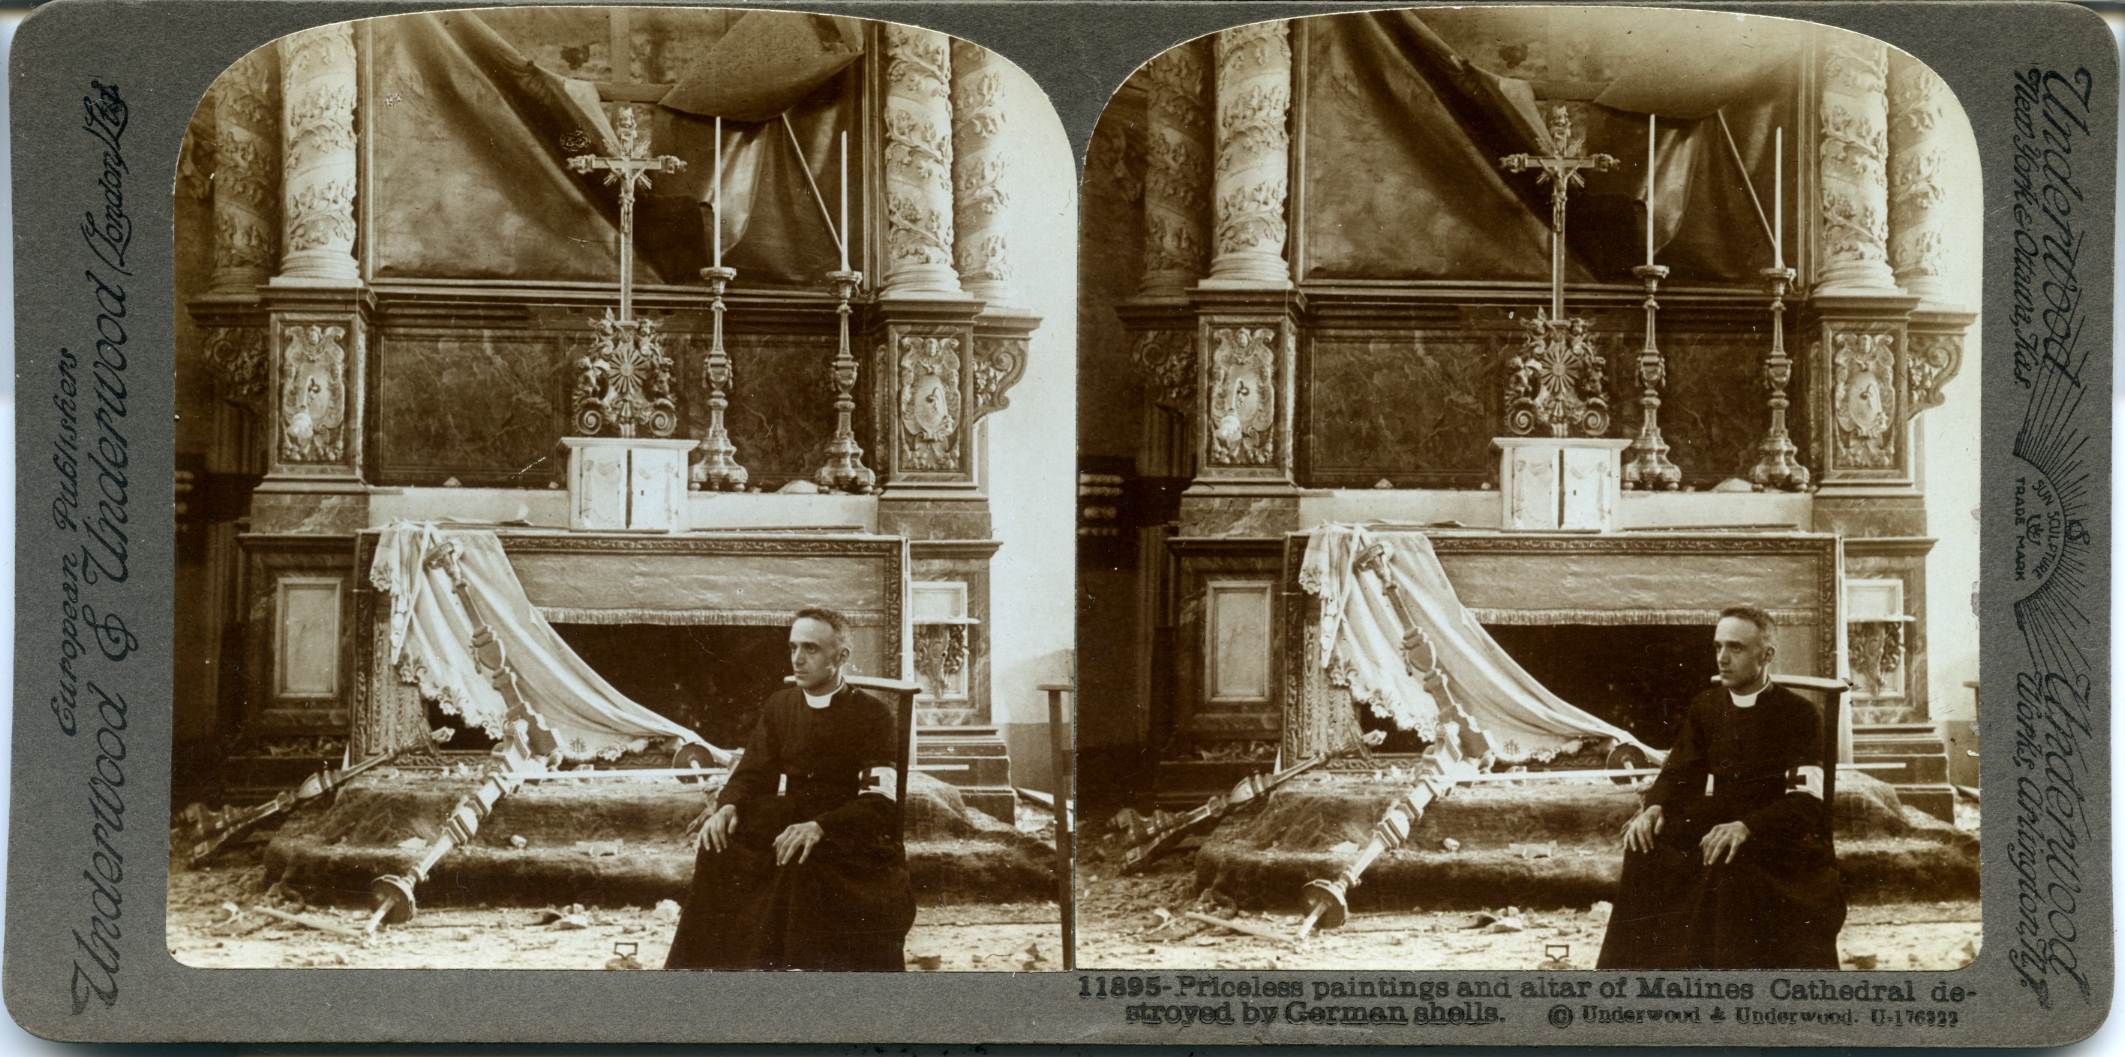 Priceless paintings and altar of Malines Cathedral destroyed by German shells